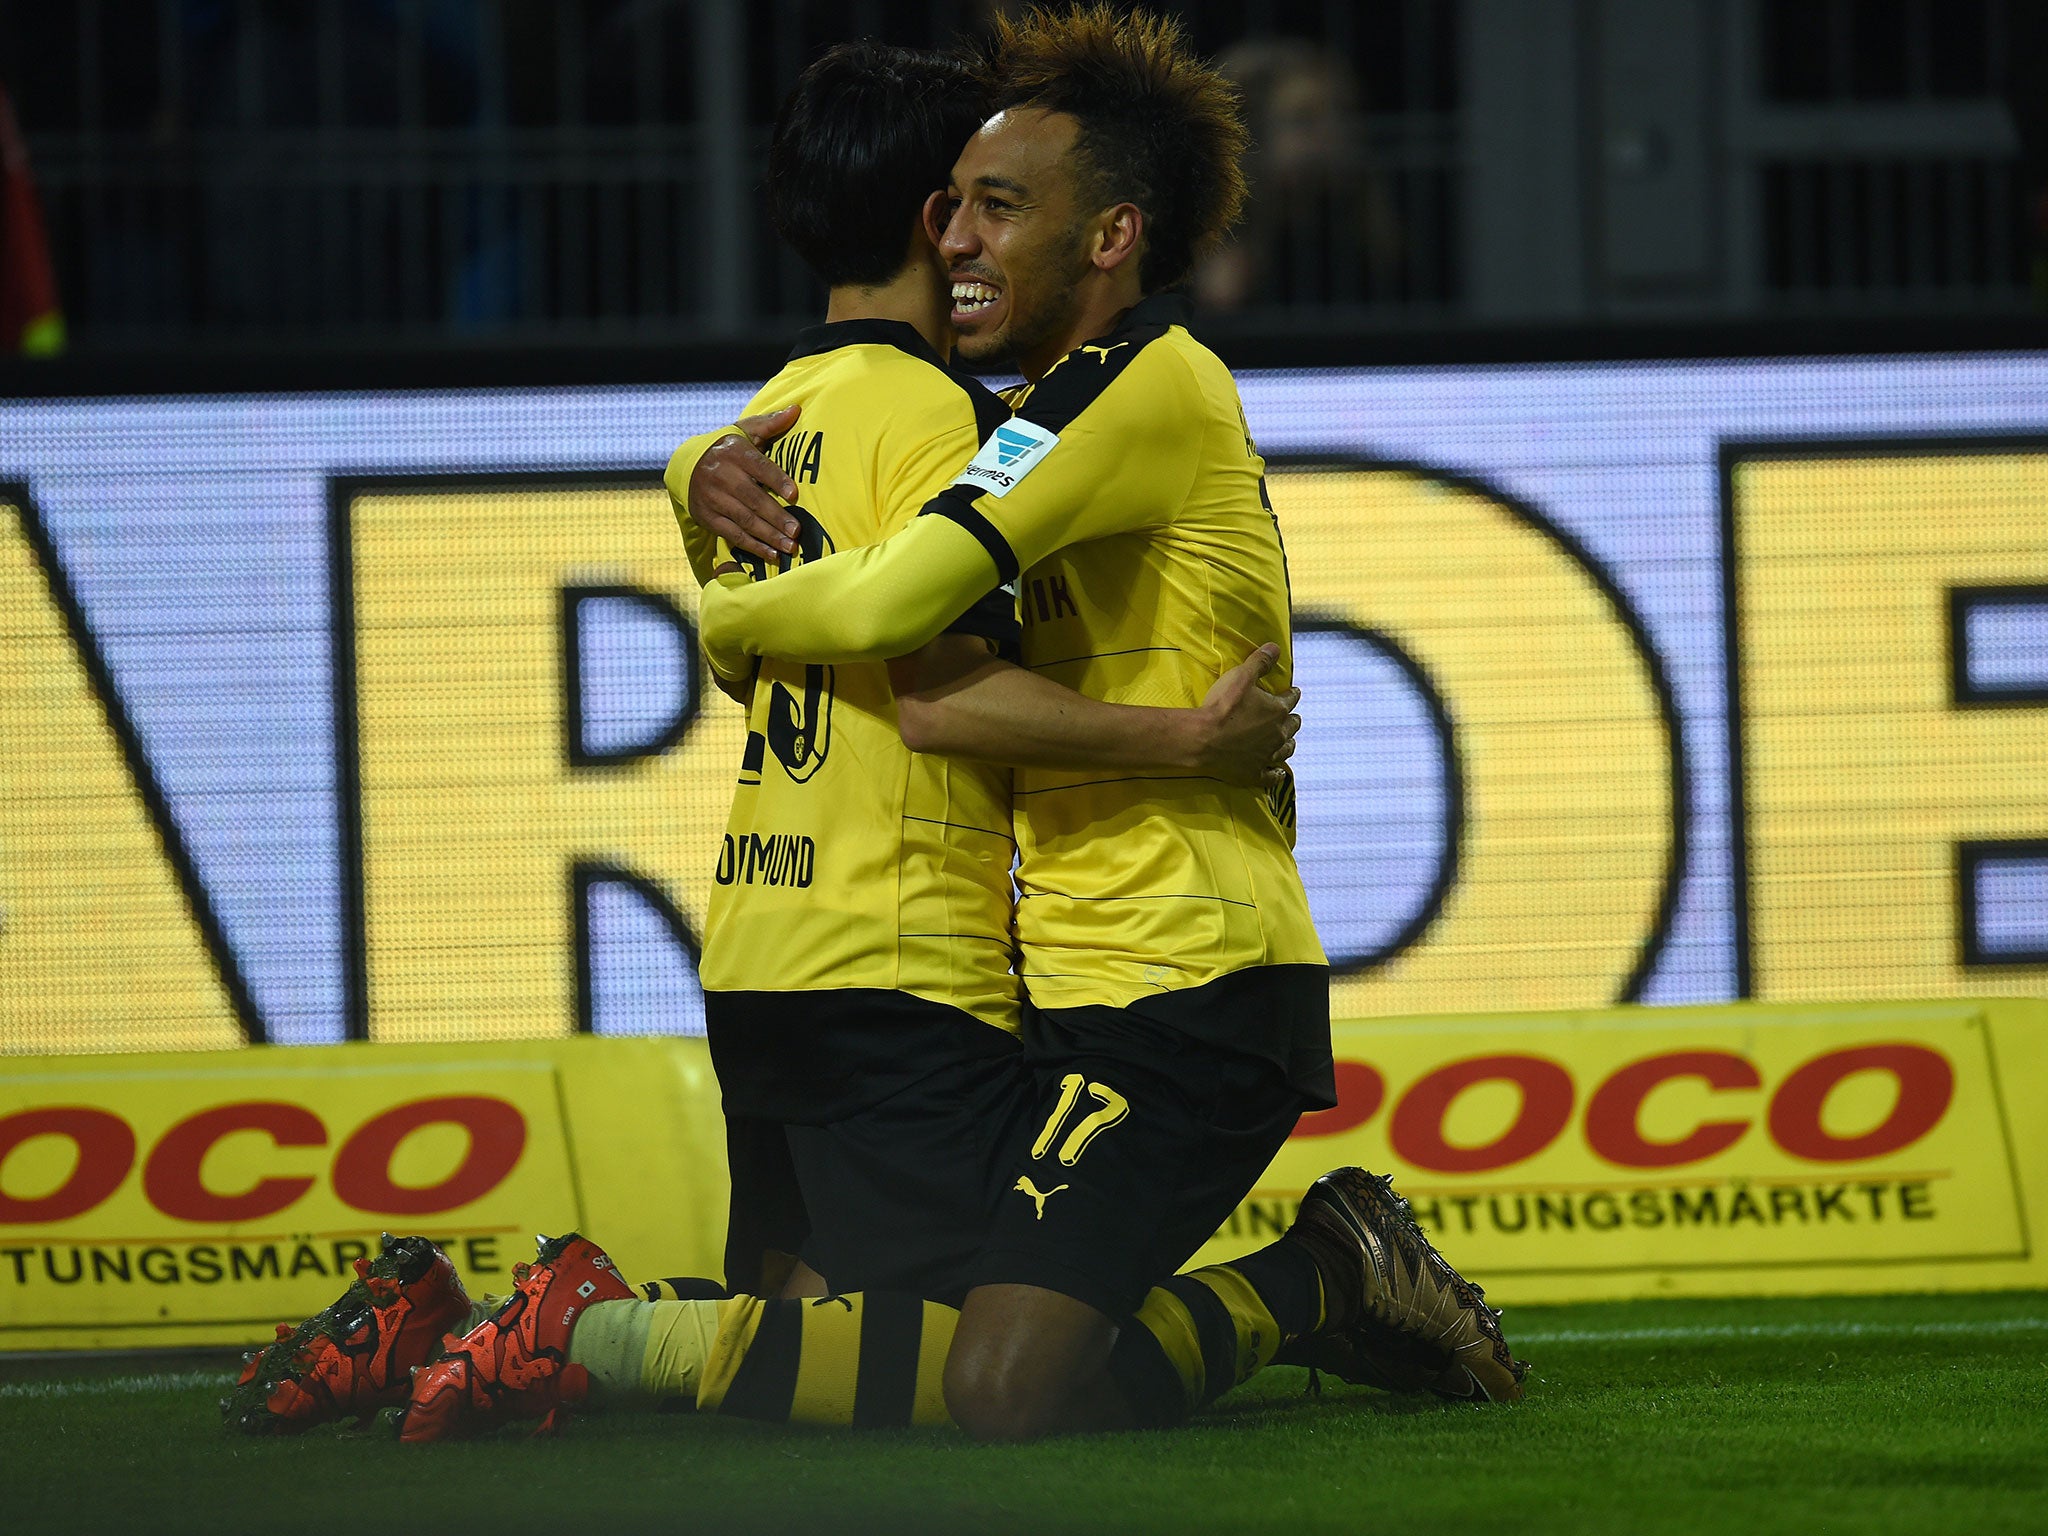 Borussia Dortmund striker Pierre-Emerick Aubameyang is said to be available for £53.5m